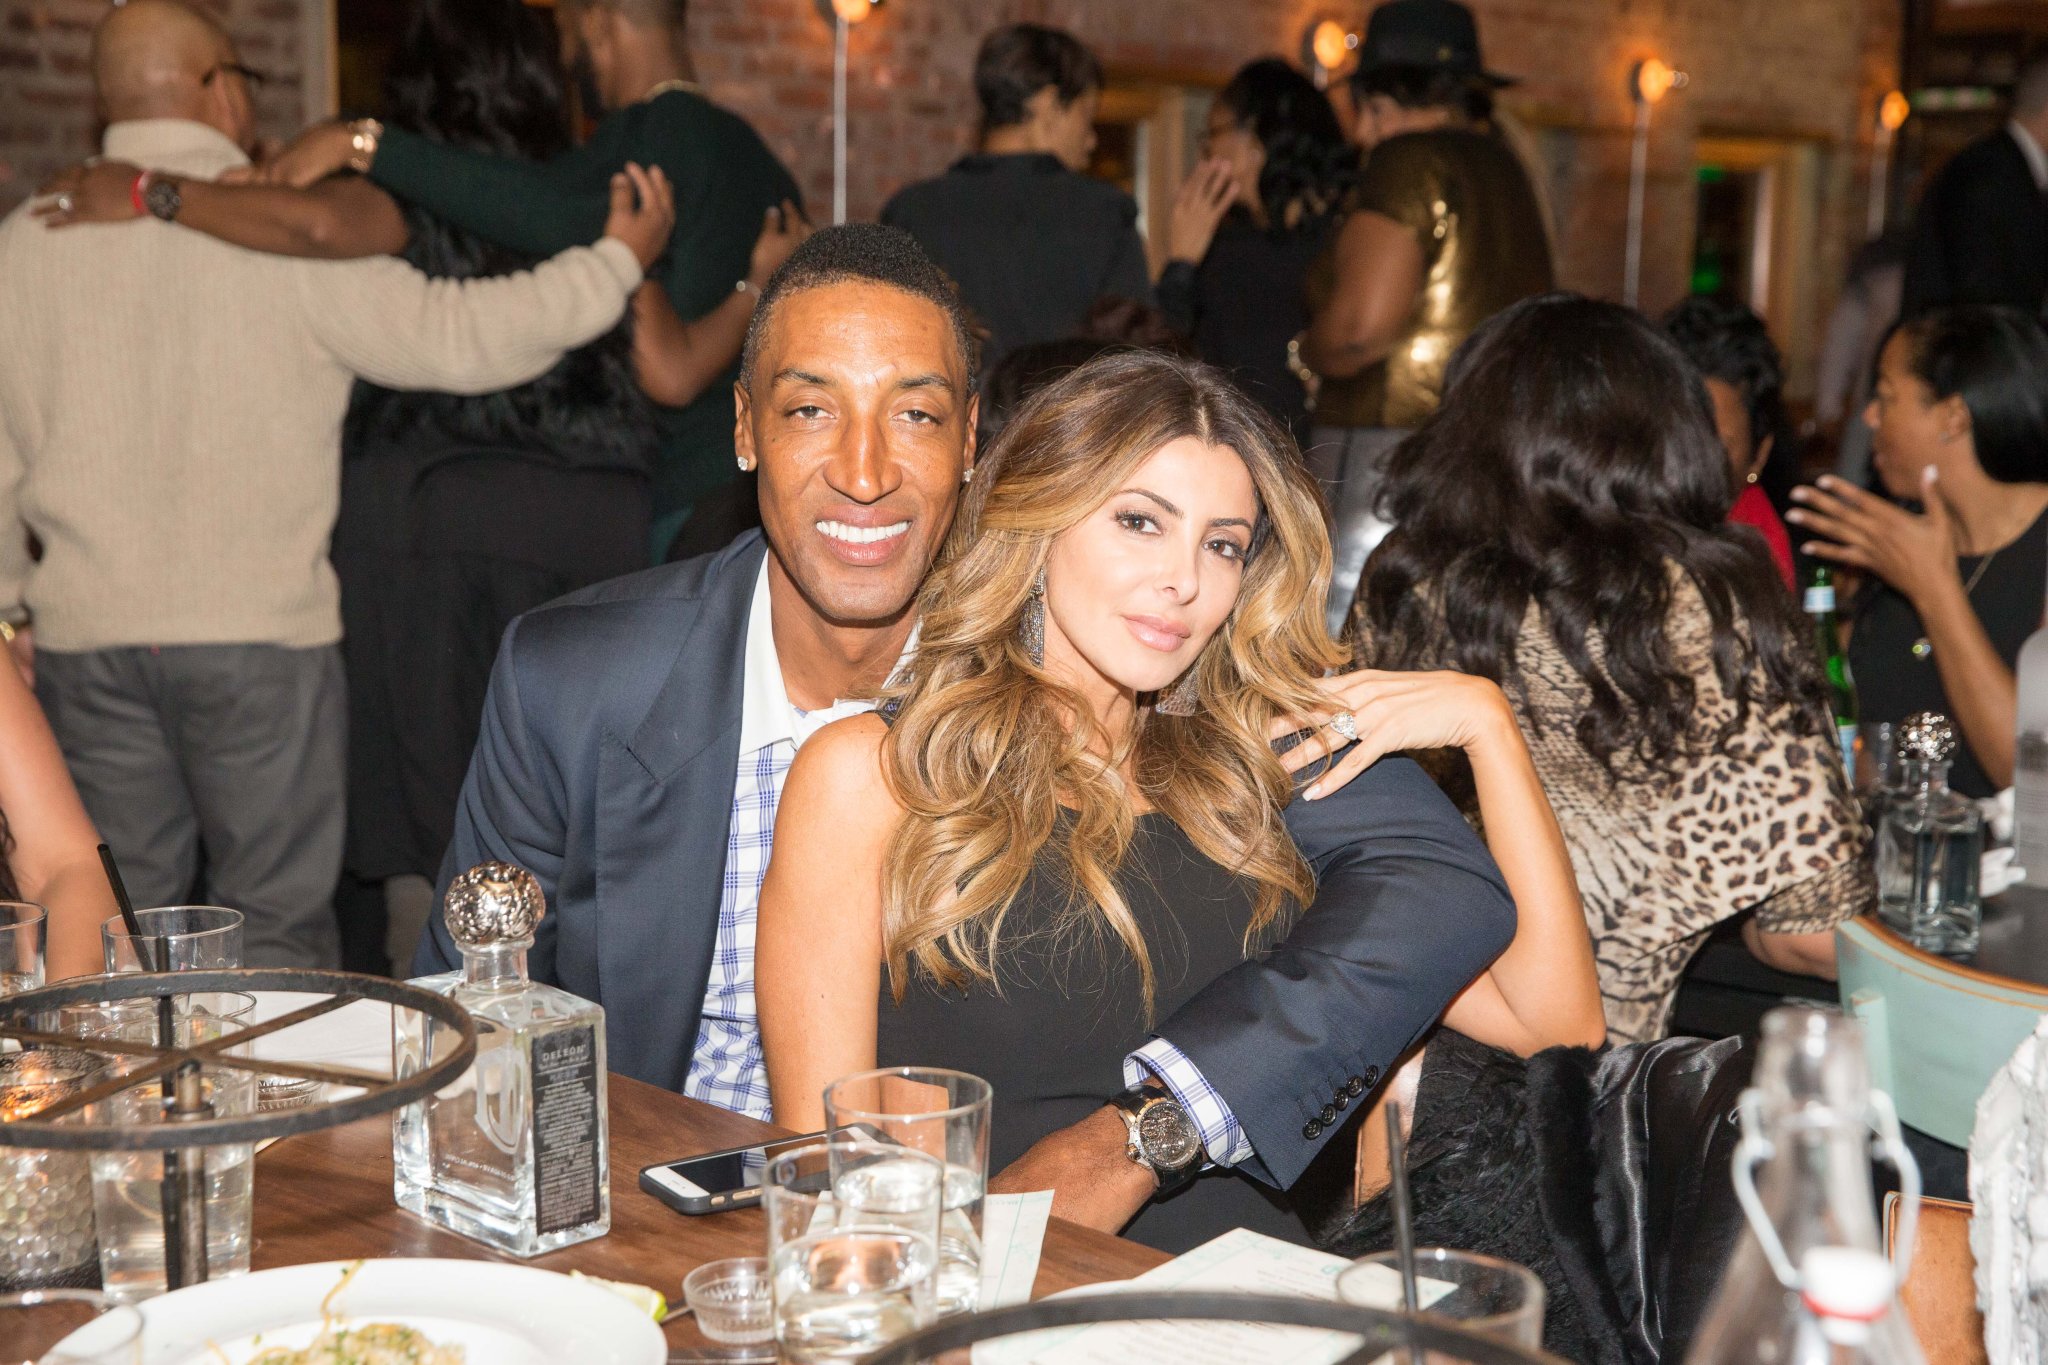 Larsa Pippen Shades Scottie In Response To Instagram Trolls Who Accused Her Of Doing Him Dirty - BroBible